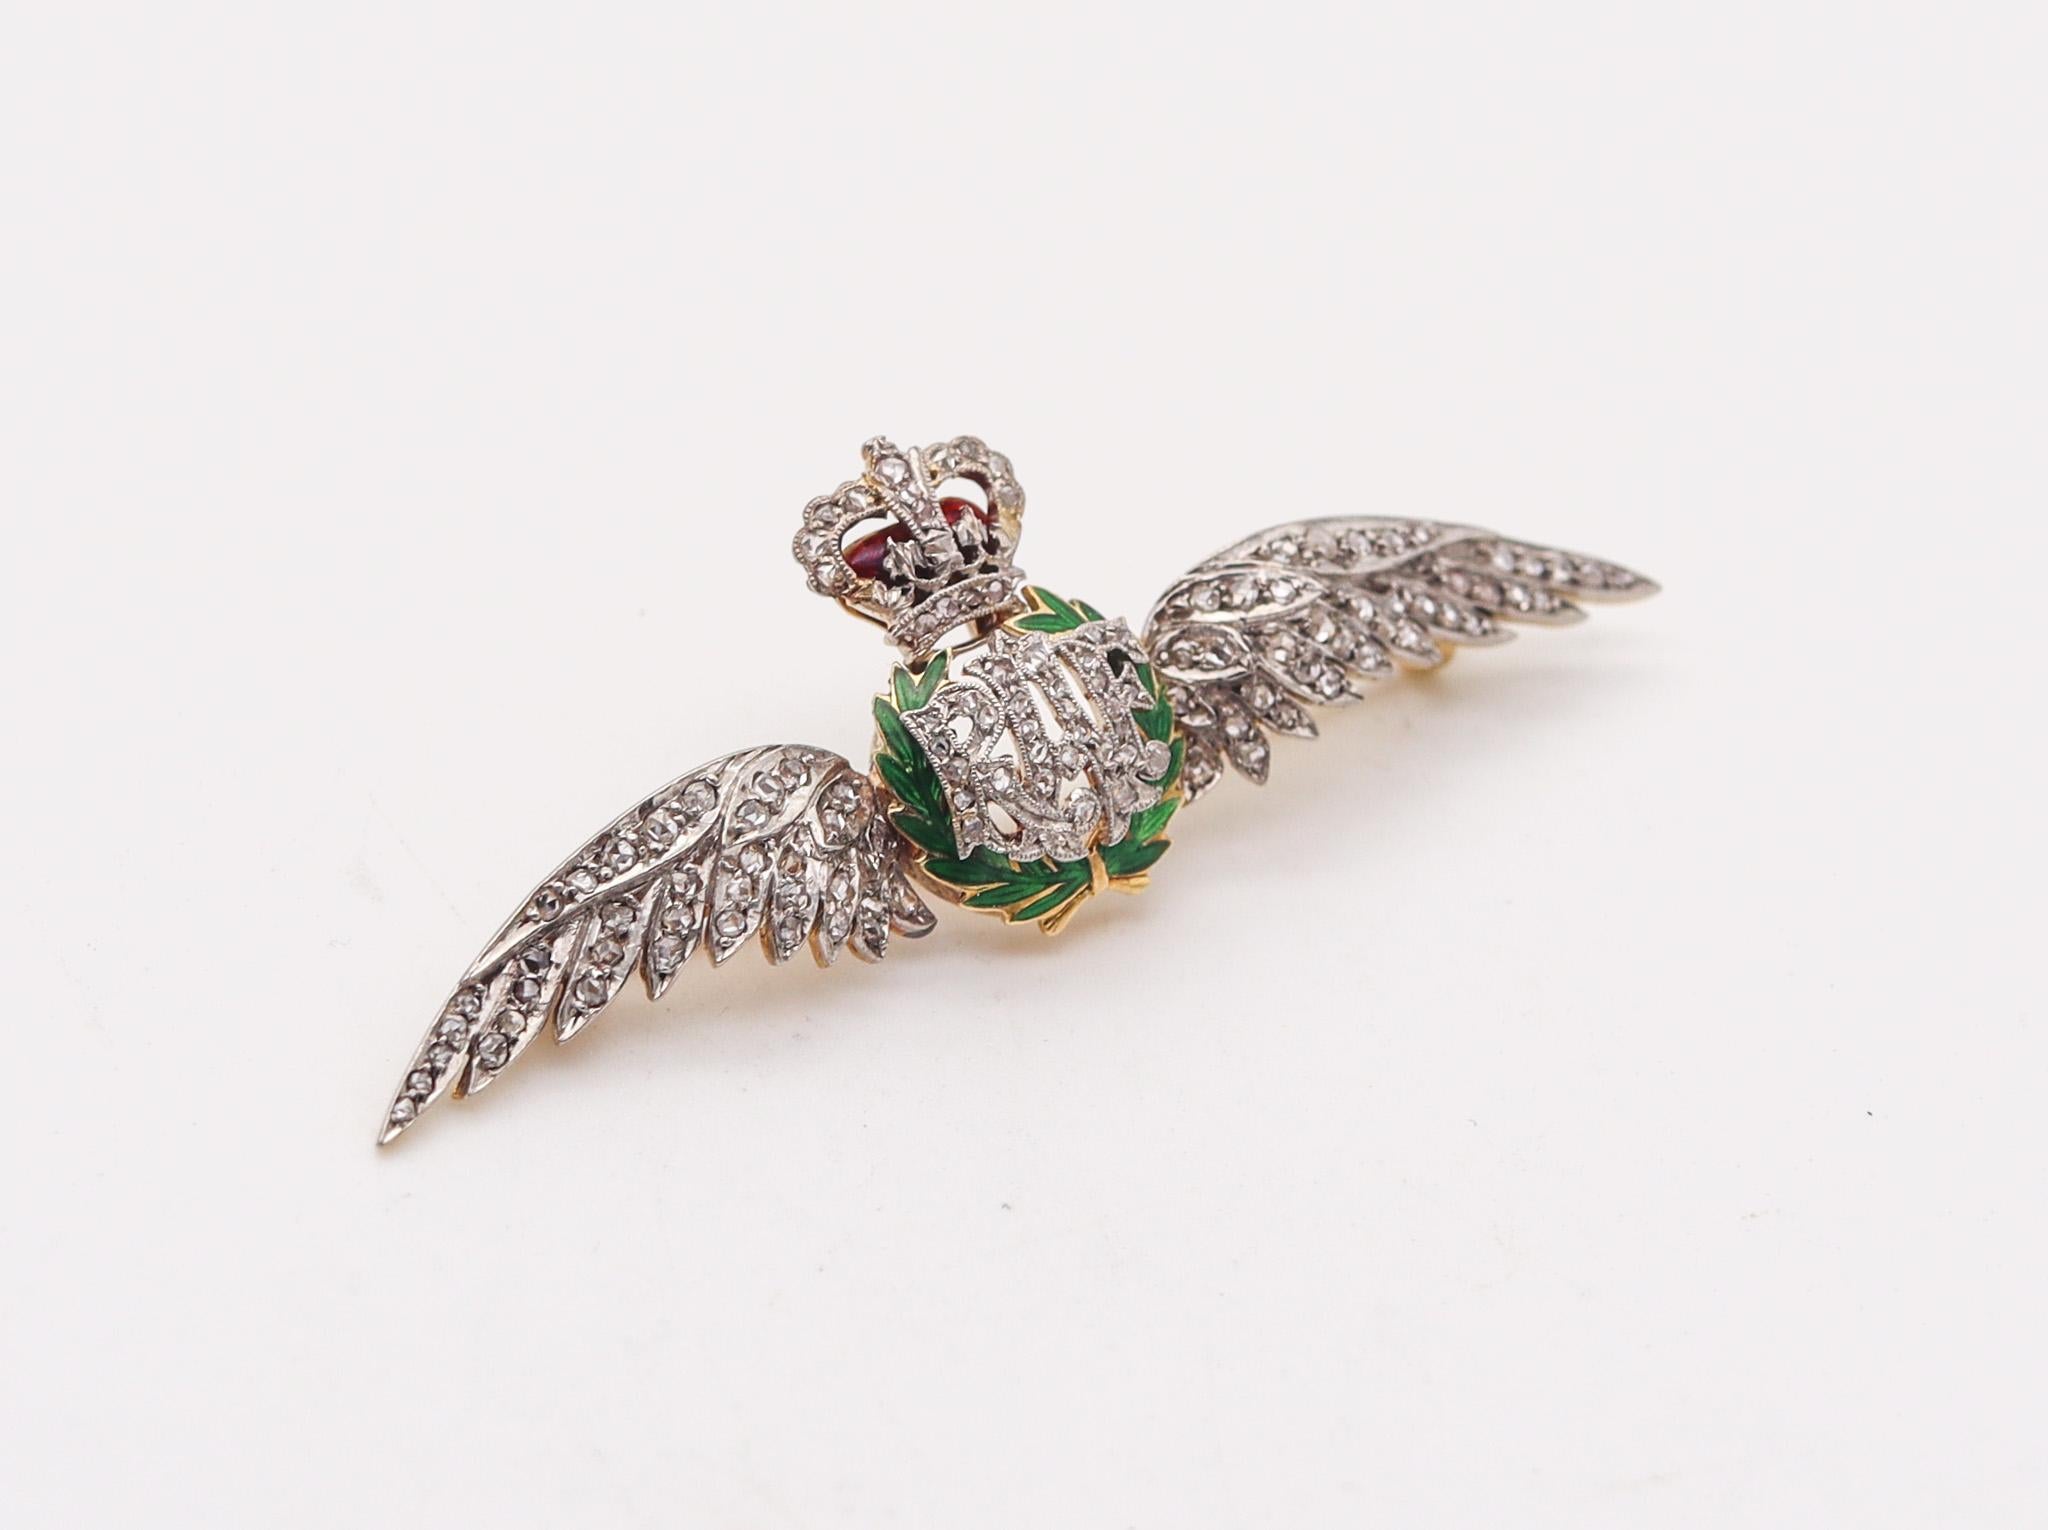 Antique Platinum & Diamond Royal Air Force Wings Brooch.

A very rare sweetheart Royal Air Force pilot wings badge-brooch, made in England during the reigning period of the king George V, around the 1920 and 1930. This historical wings-badge is